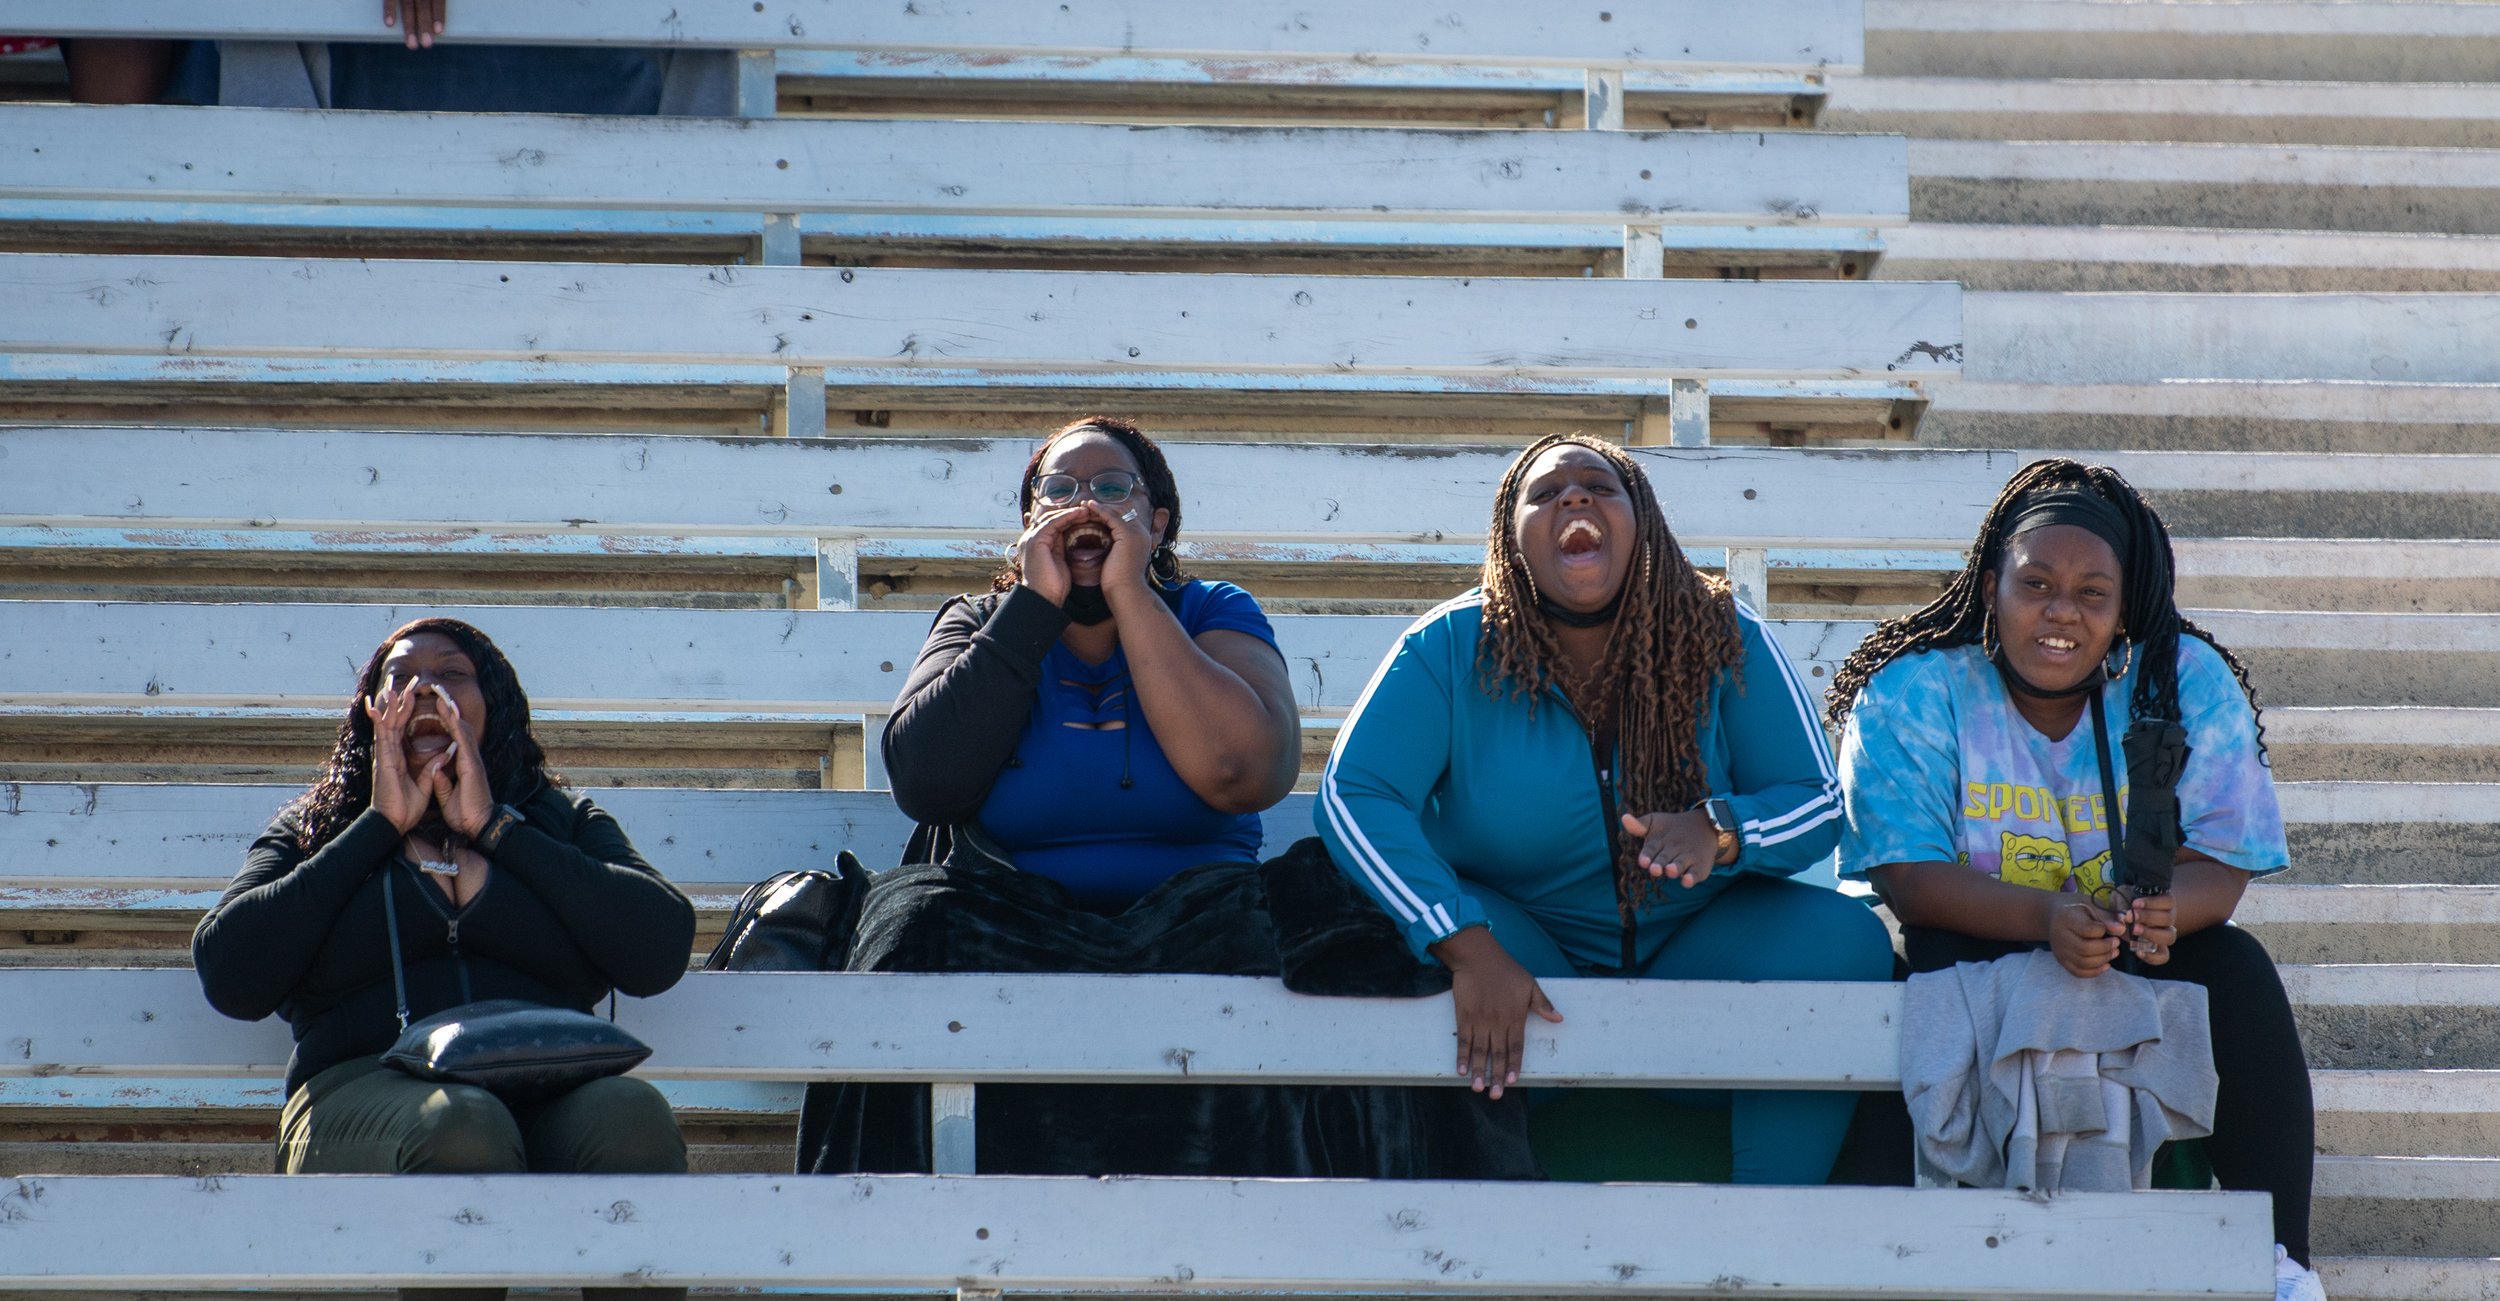  Fans cheer for The Corsairs as they make a drive on Santa Monica College's main campus field in Santa Monica, Calif. on October 23, 2021. The game against Antelope Valley is the first home game since a nine-person COVID infection that forced postpon